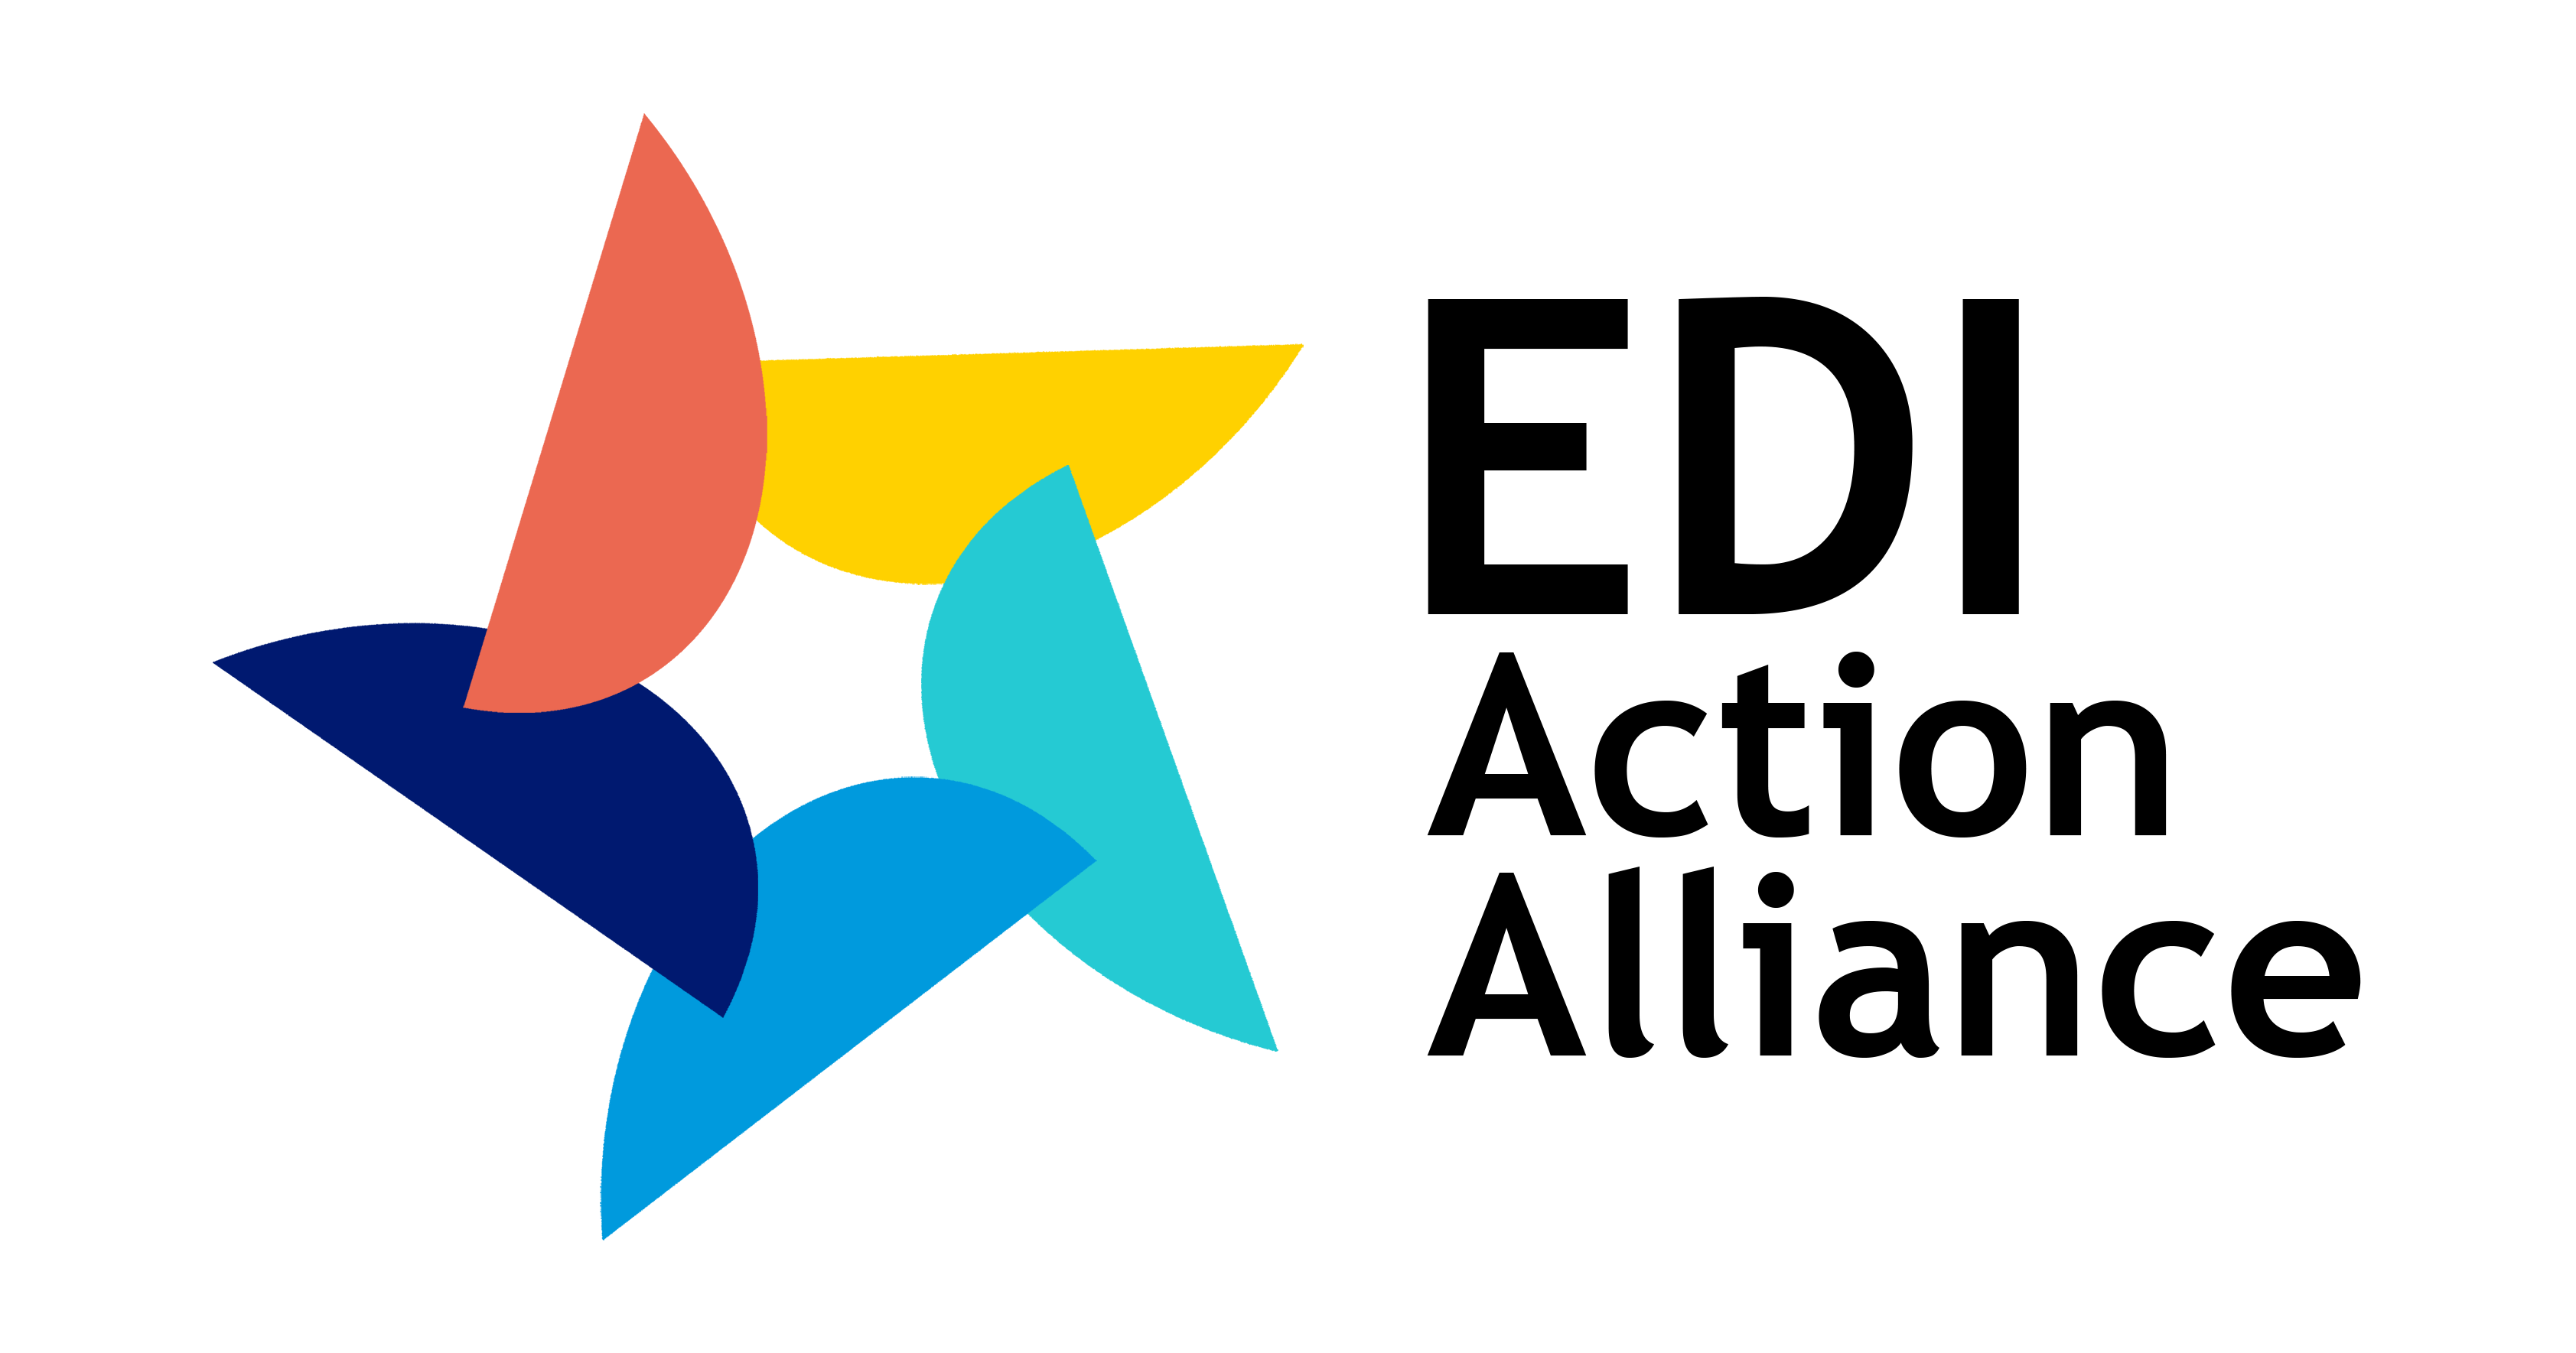 EDI Action Alliance logo with five overlapping, colorful shapes